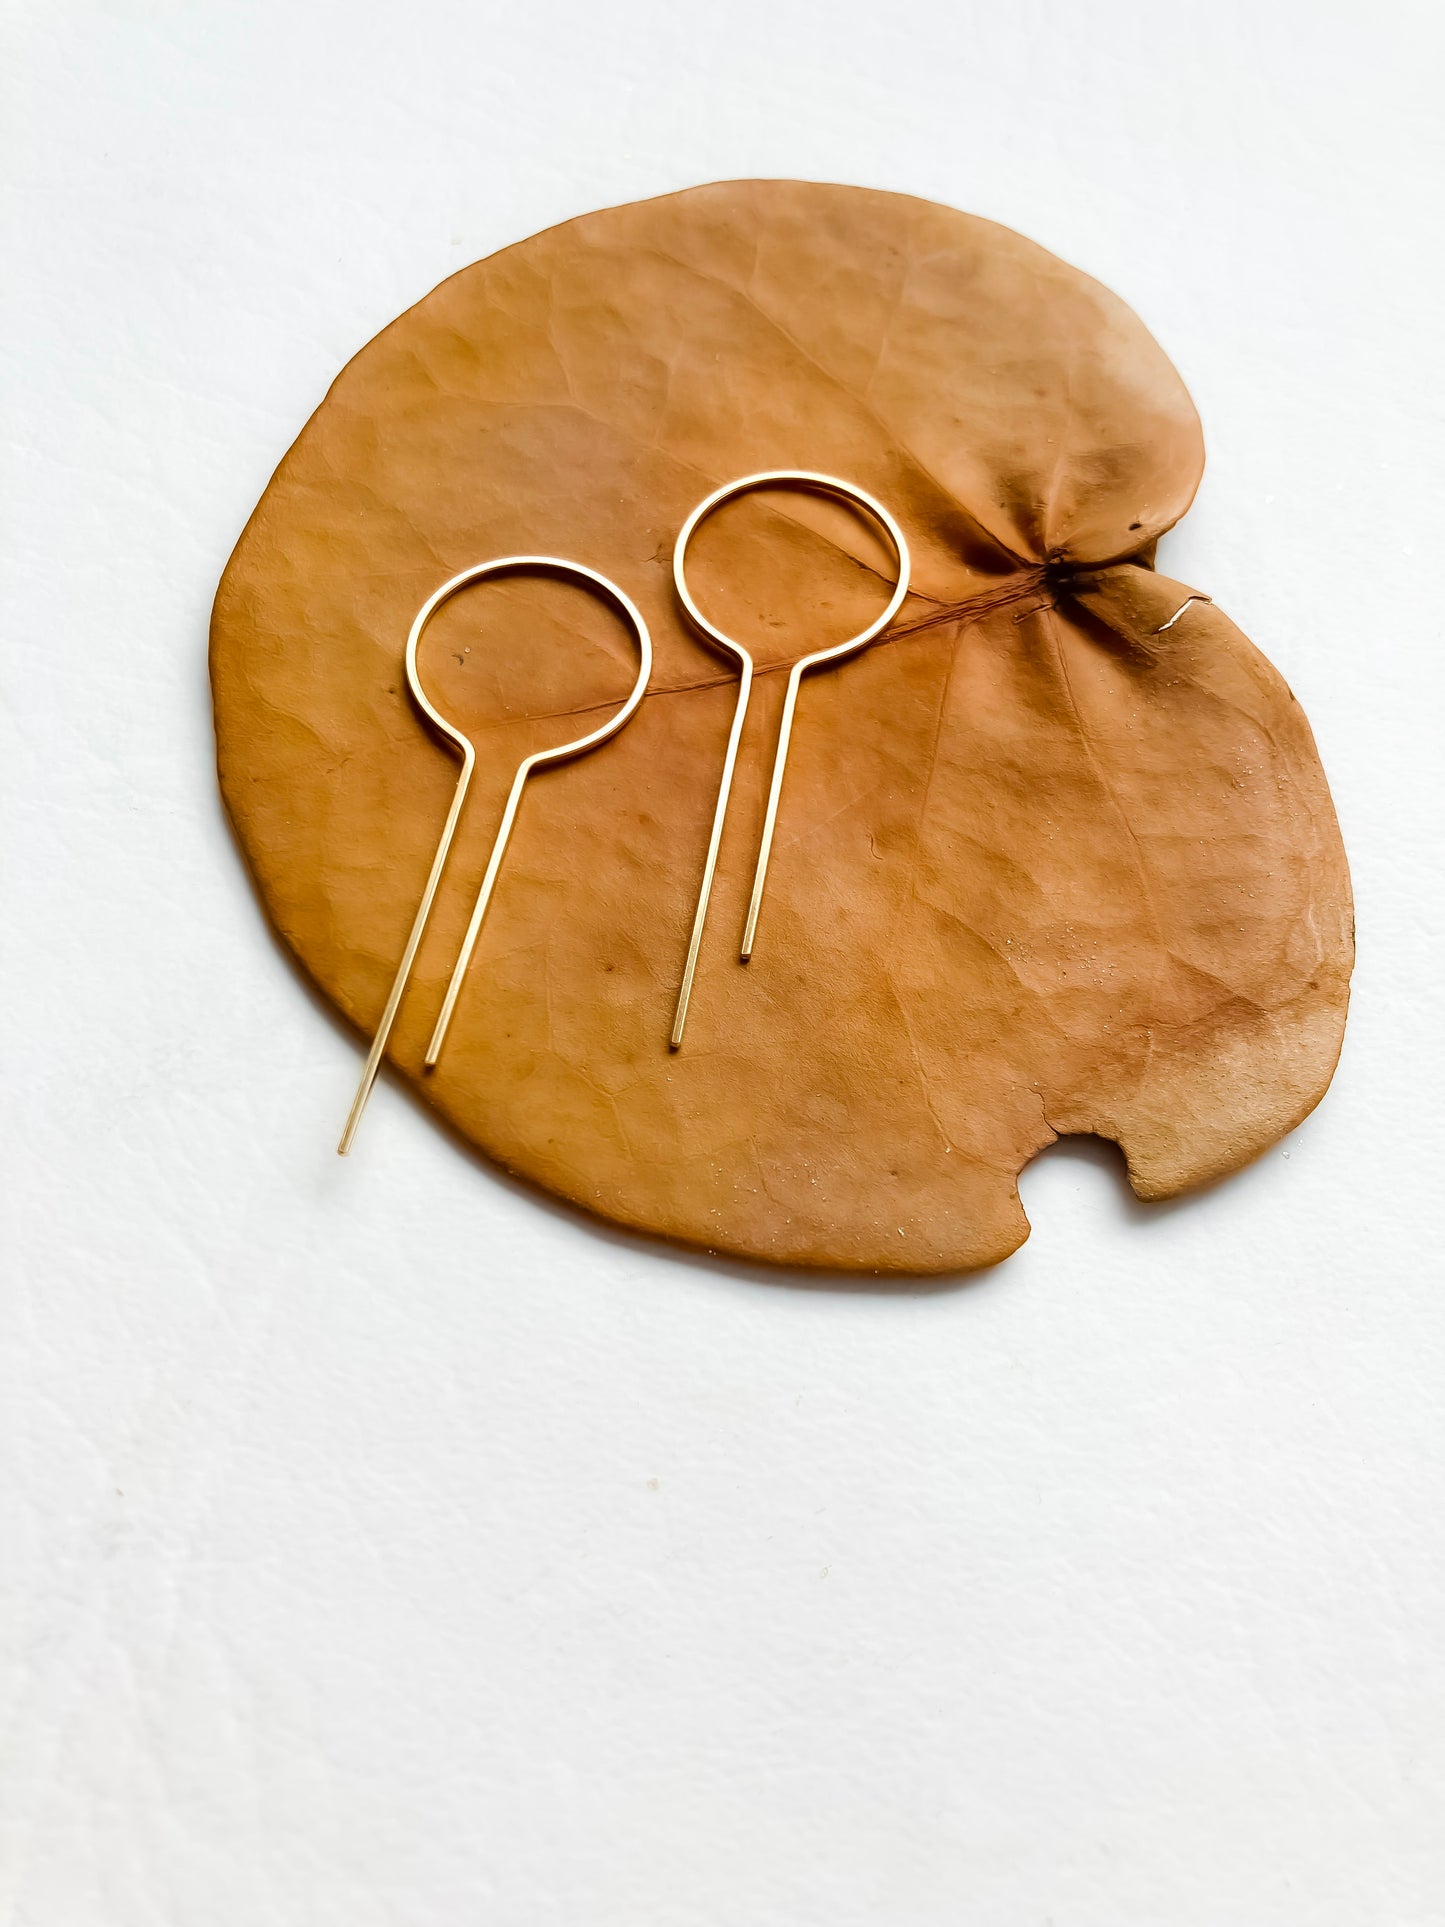 theader earrings gold fill long modern minimalist against a dried brown leaf and white background